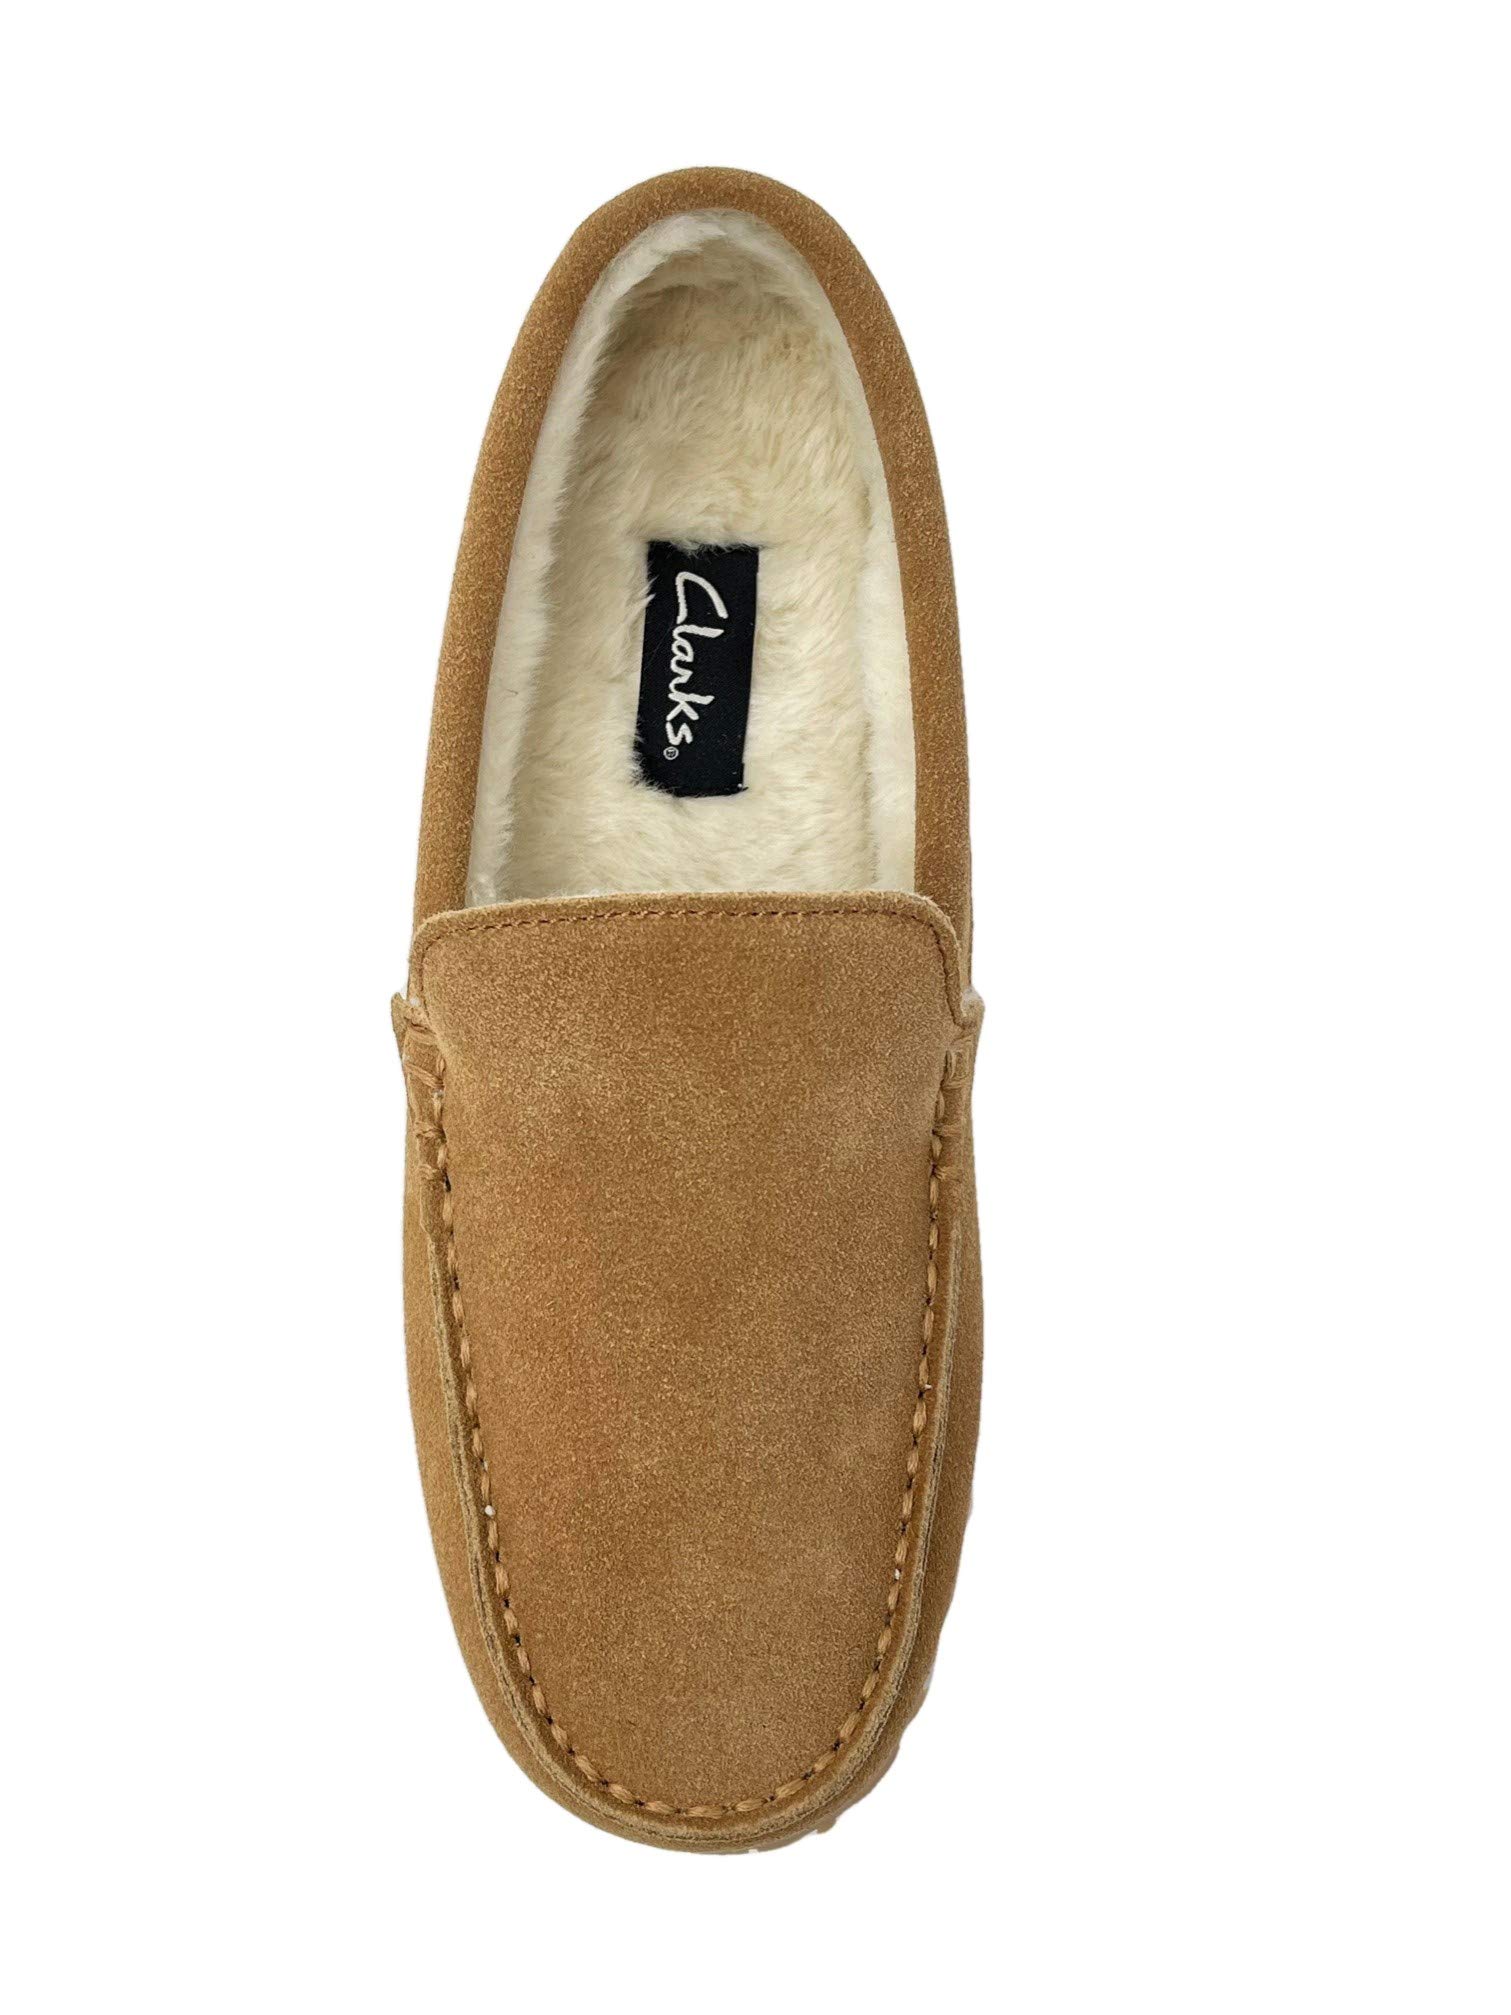 Clarks Mens Suede Moccasin Slippers Warm Cozy Indoor Outdoor Plush Faux Fur Lined Slipper For Men